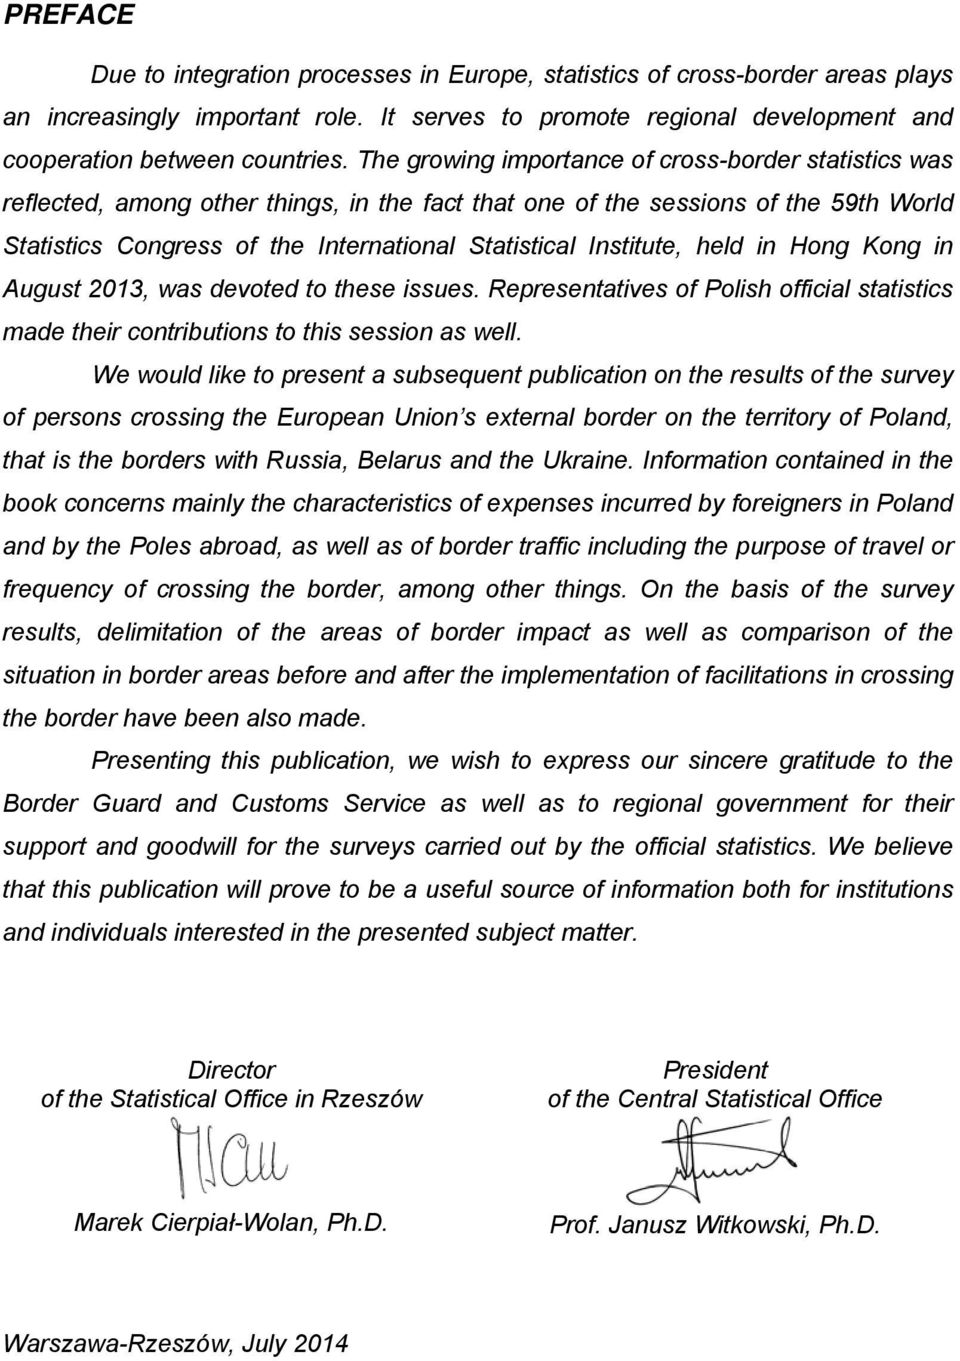 Institute, held in Hong Kong in August 2013, was devoted to these issues. Representatives of Polish official statistics made their contributions to this session as well.